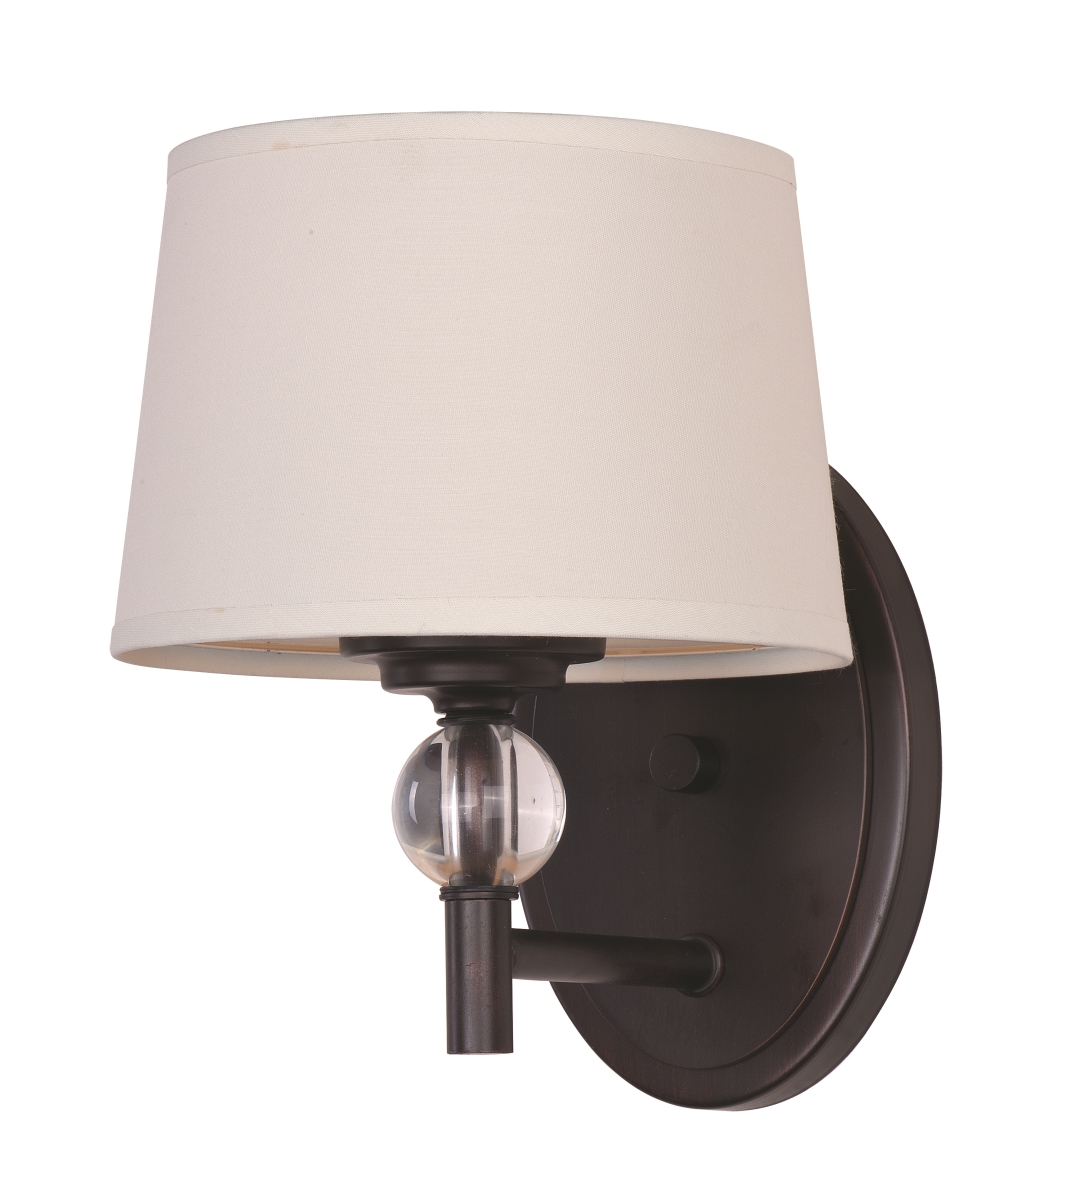 12761wtoi 8.5 X 6.5 In. Rondo One Light Wall Sconce, Oil Rubbed Bronze